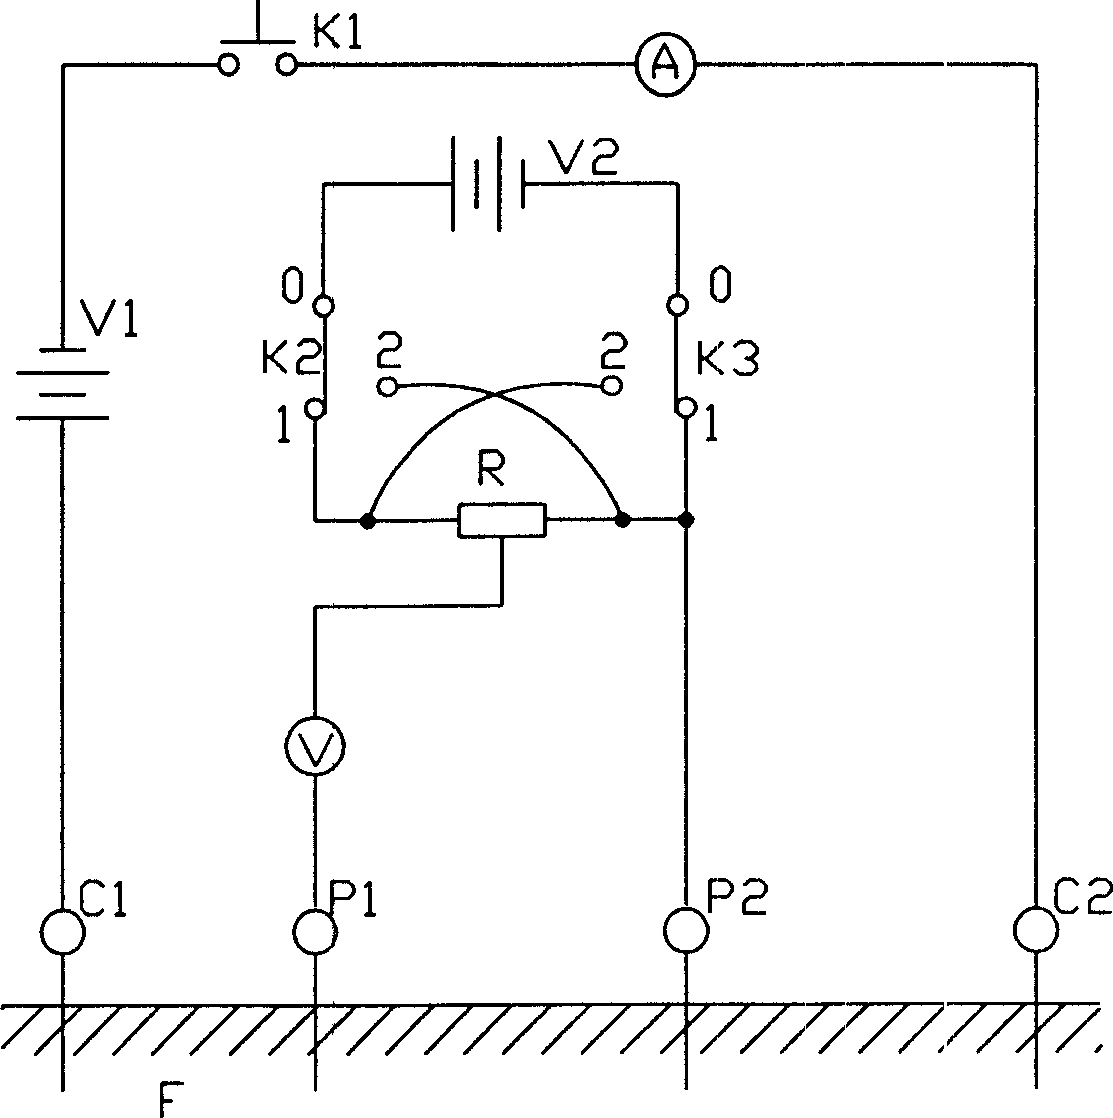 Grounded resistance measuring apparatus